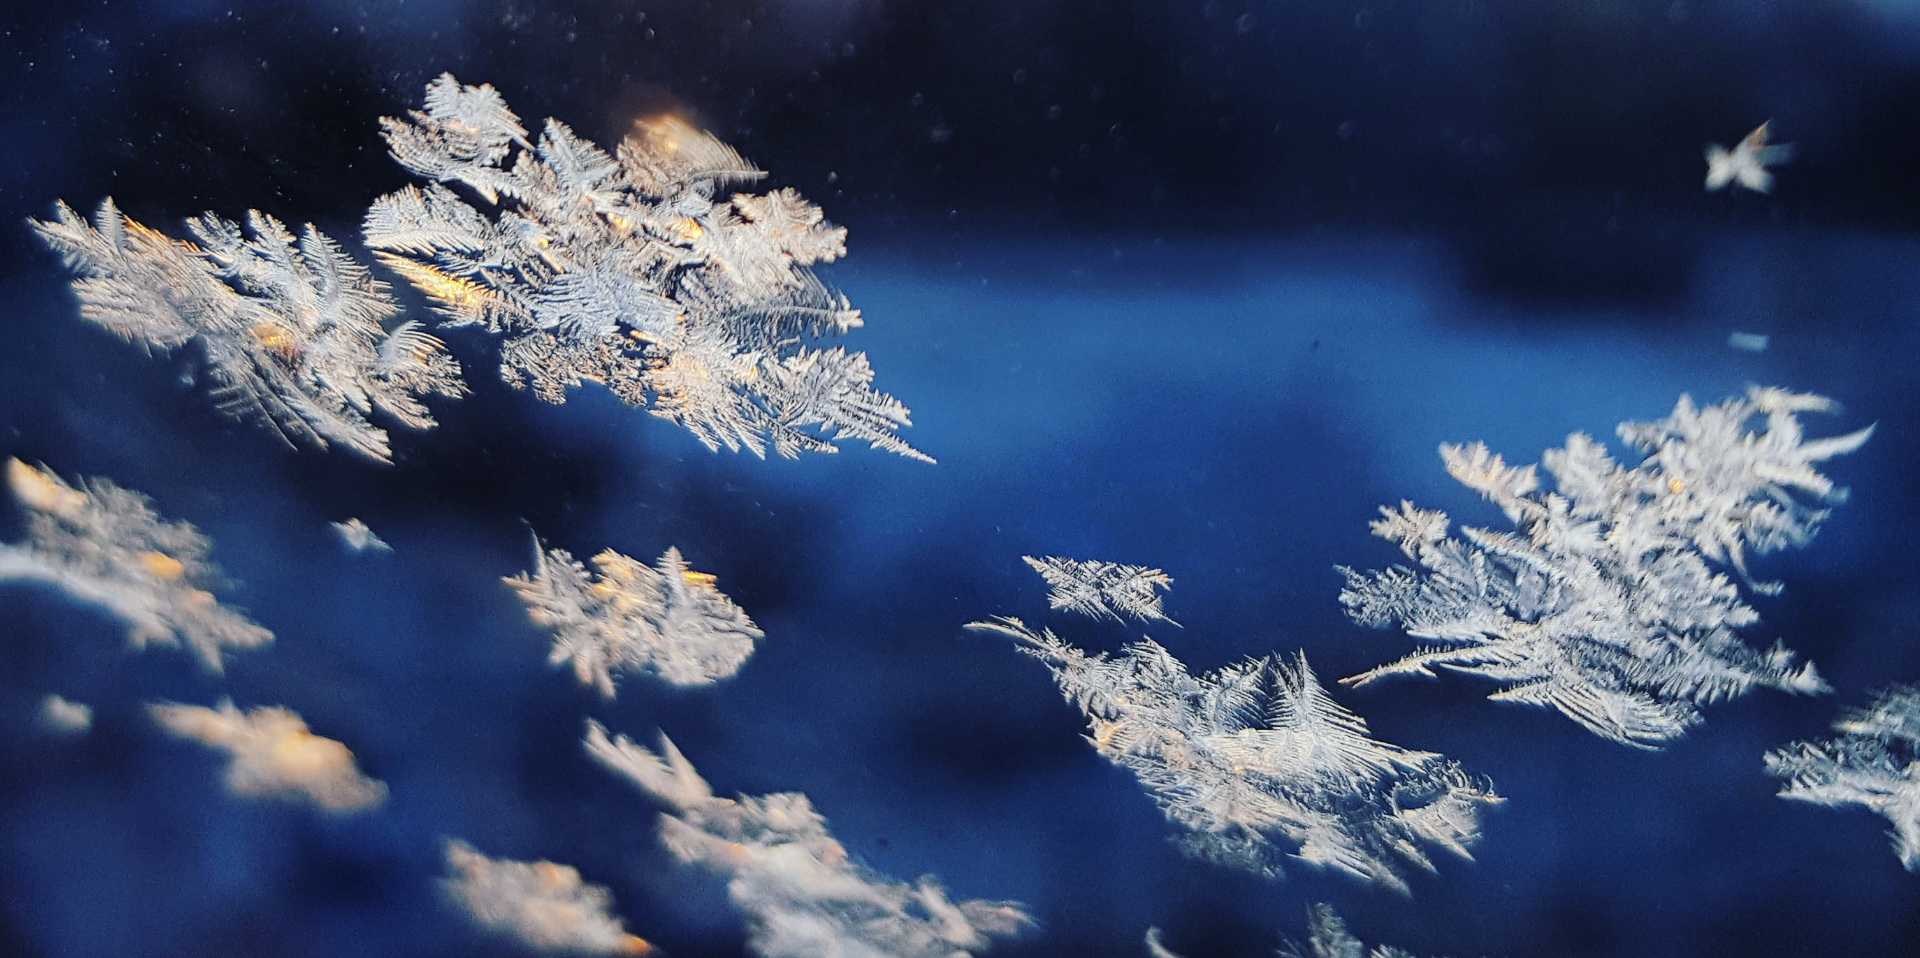 Snowflakes All Fall In One of 35 Different Shapes